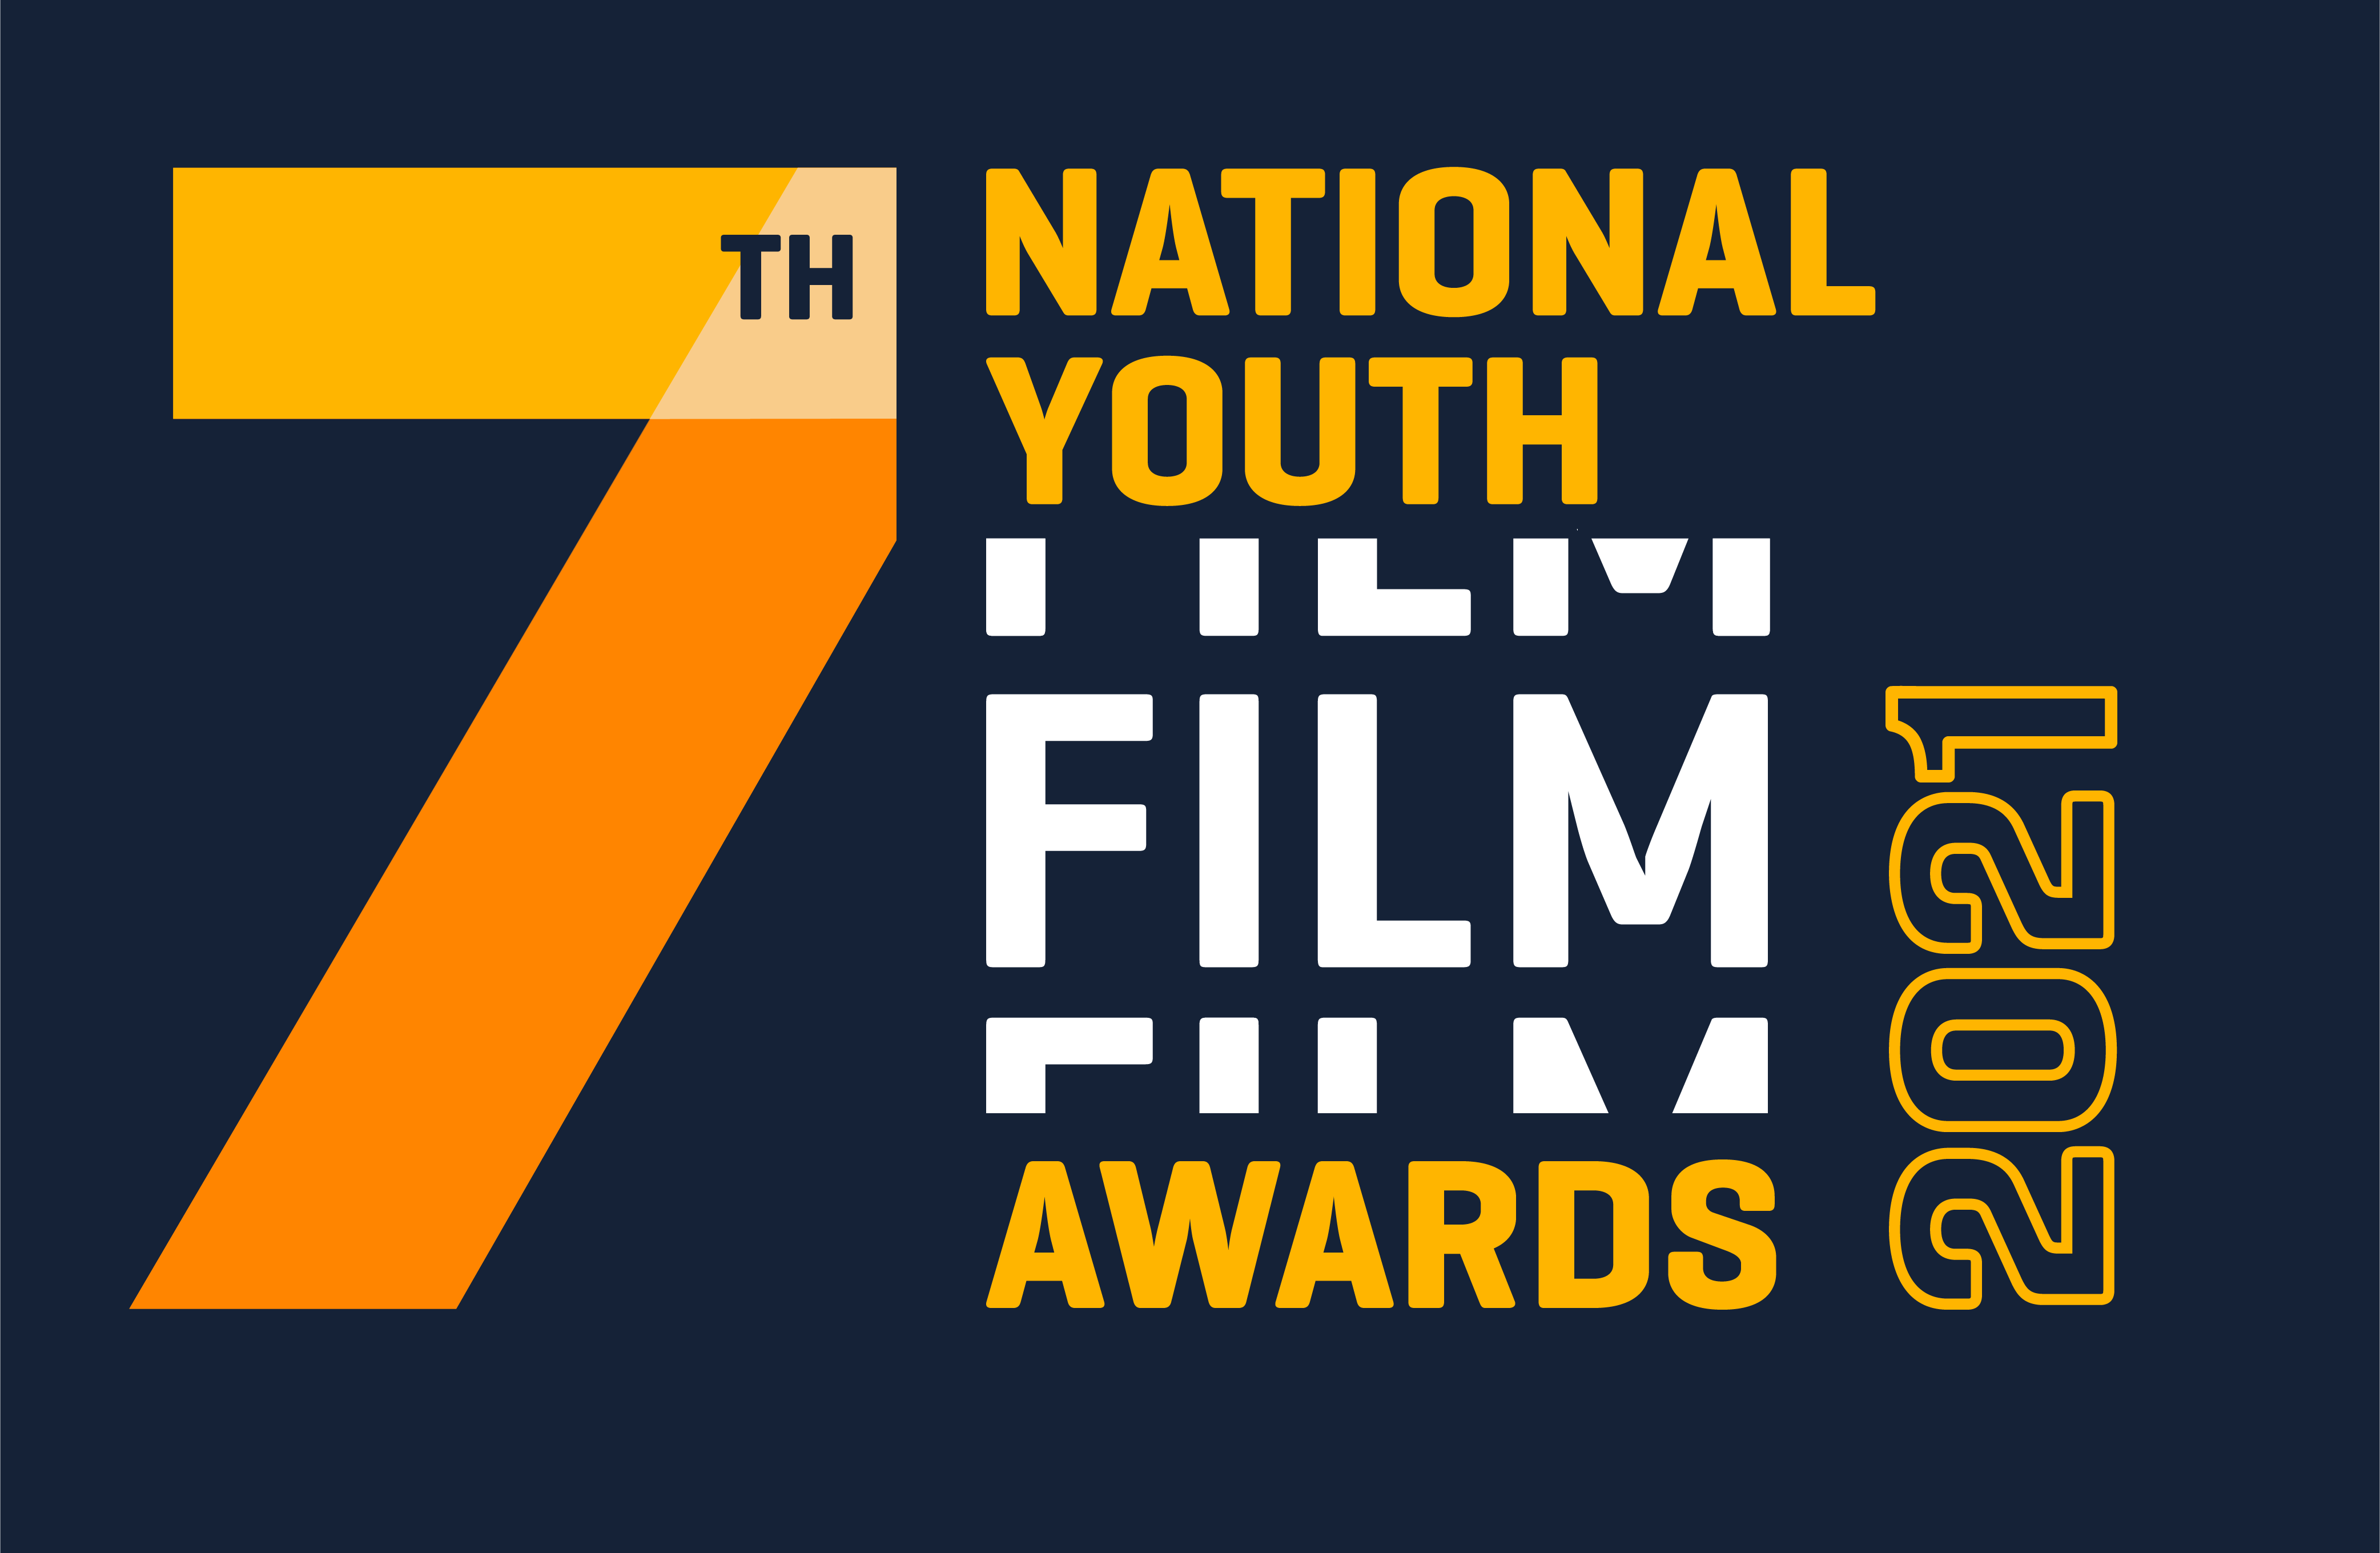 THE COMPLETE GUIDE TO NATIONAL YOUTH FILM AWARDS (NYFA) CONFERENCE 2021